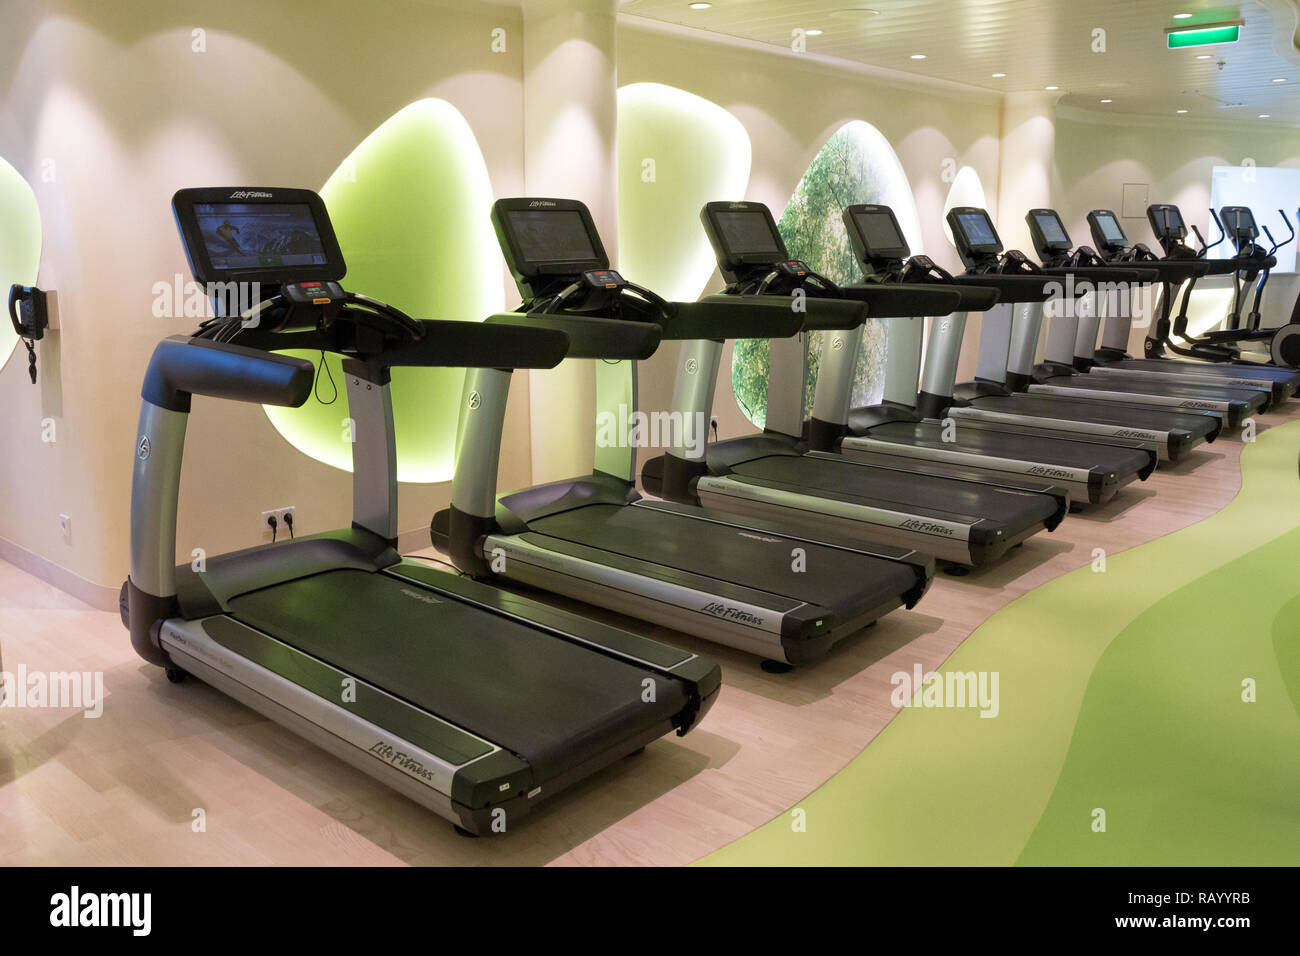 ROTTERDAM - NOV 24, 2016: Row of treadmills in the fitness center on board of a cruise ship. Stock Photo